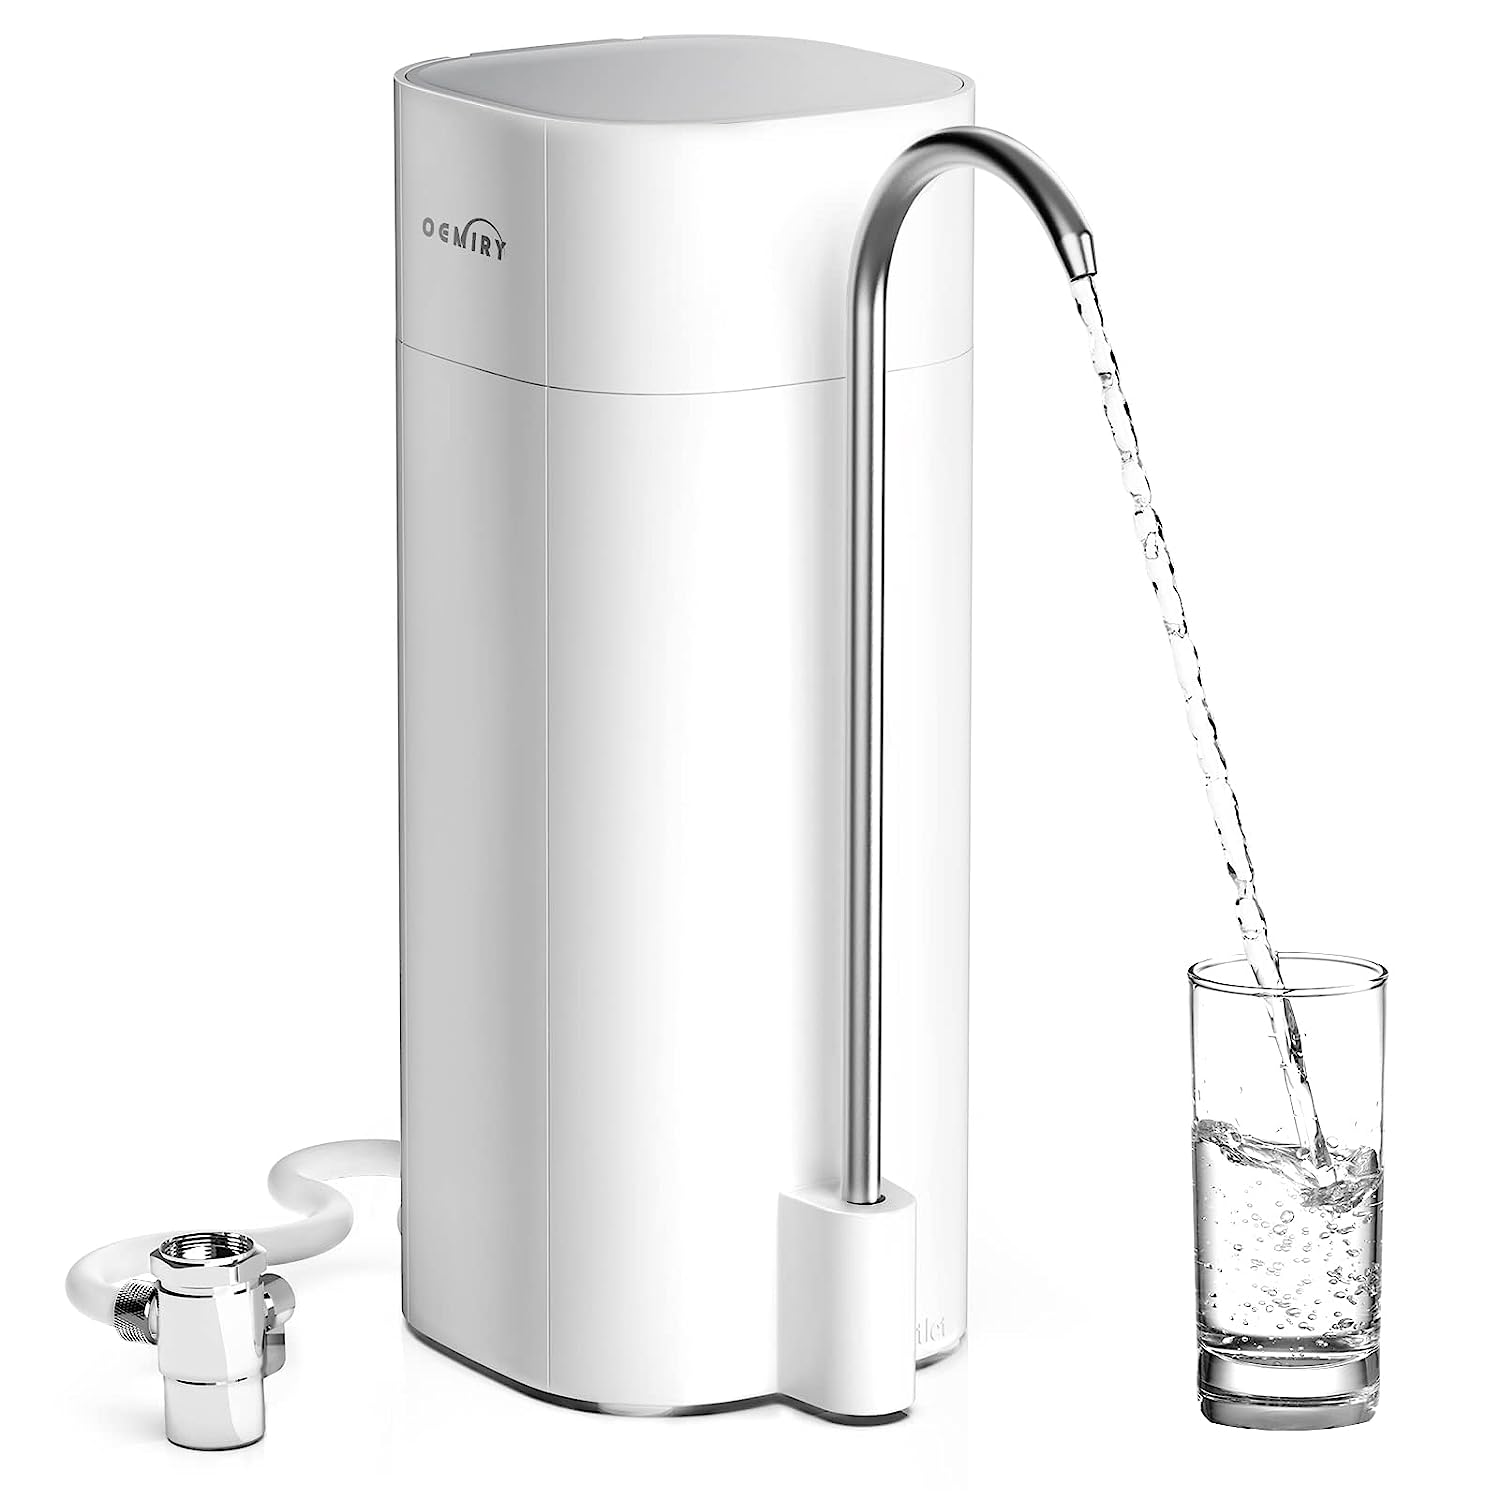 OEMIRY Countertop Water Filtration System, NSF/ANSI [...]